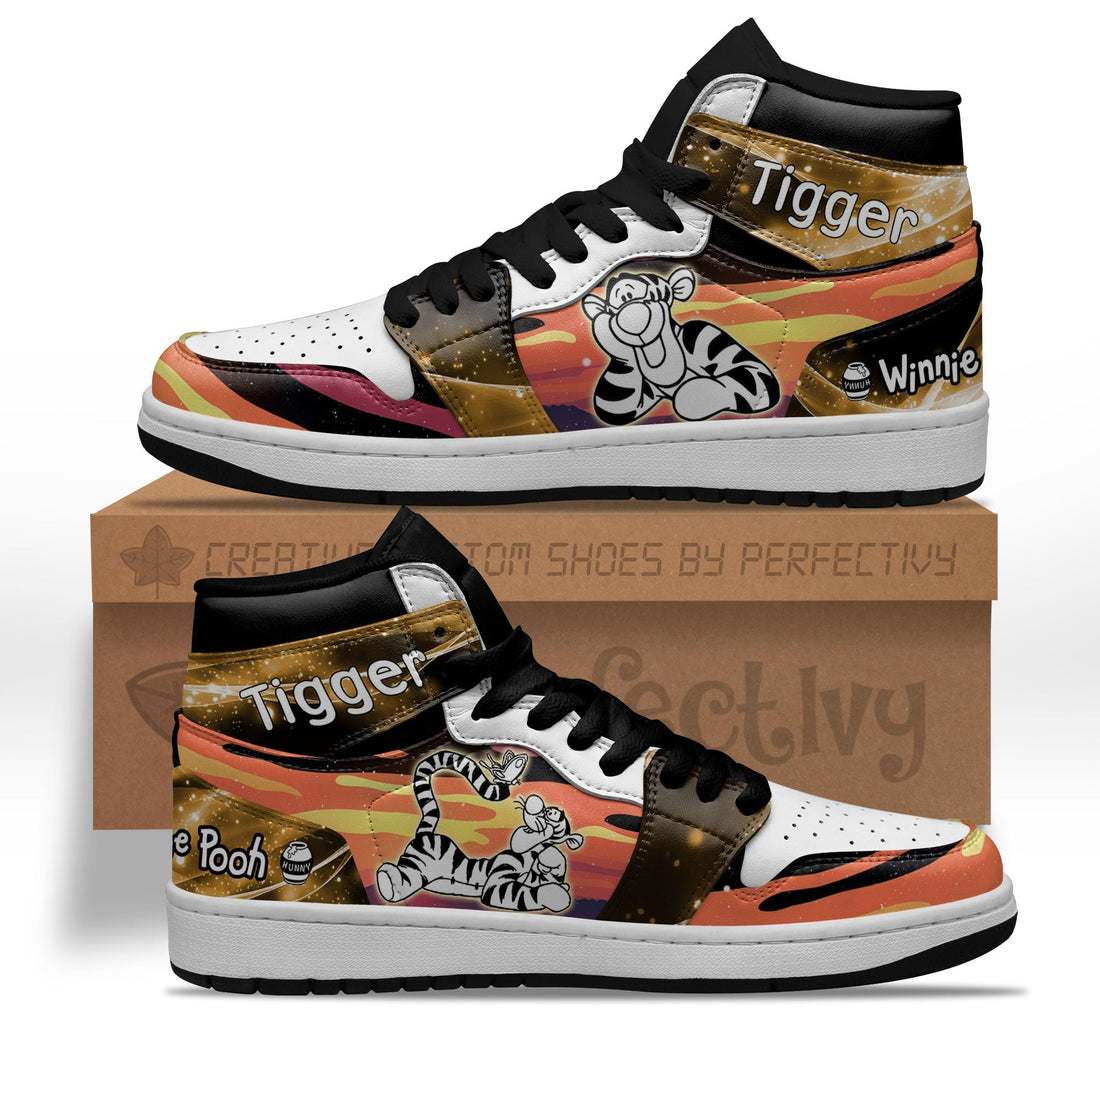 Tigger Silhouette J1 Shoes Custom For Fans Sneakers PT10-Gear Wanta